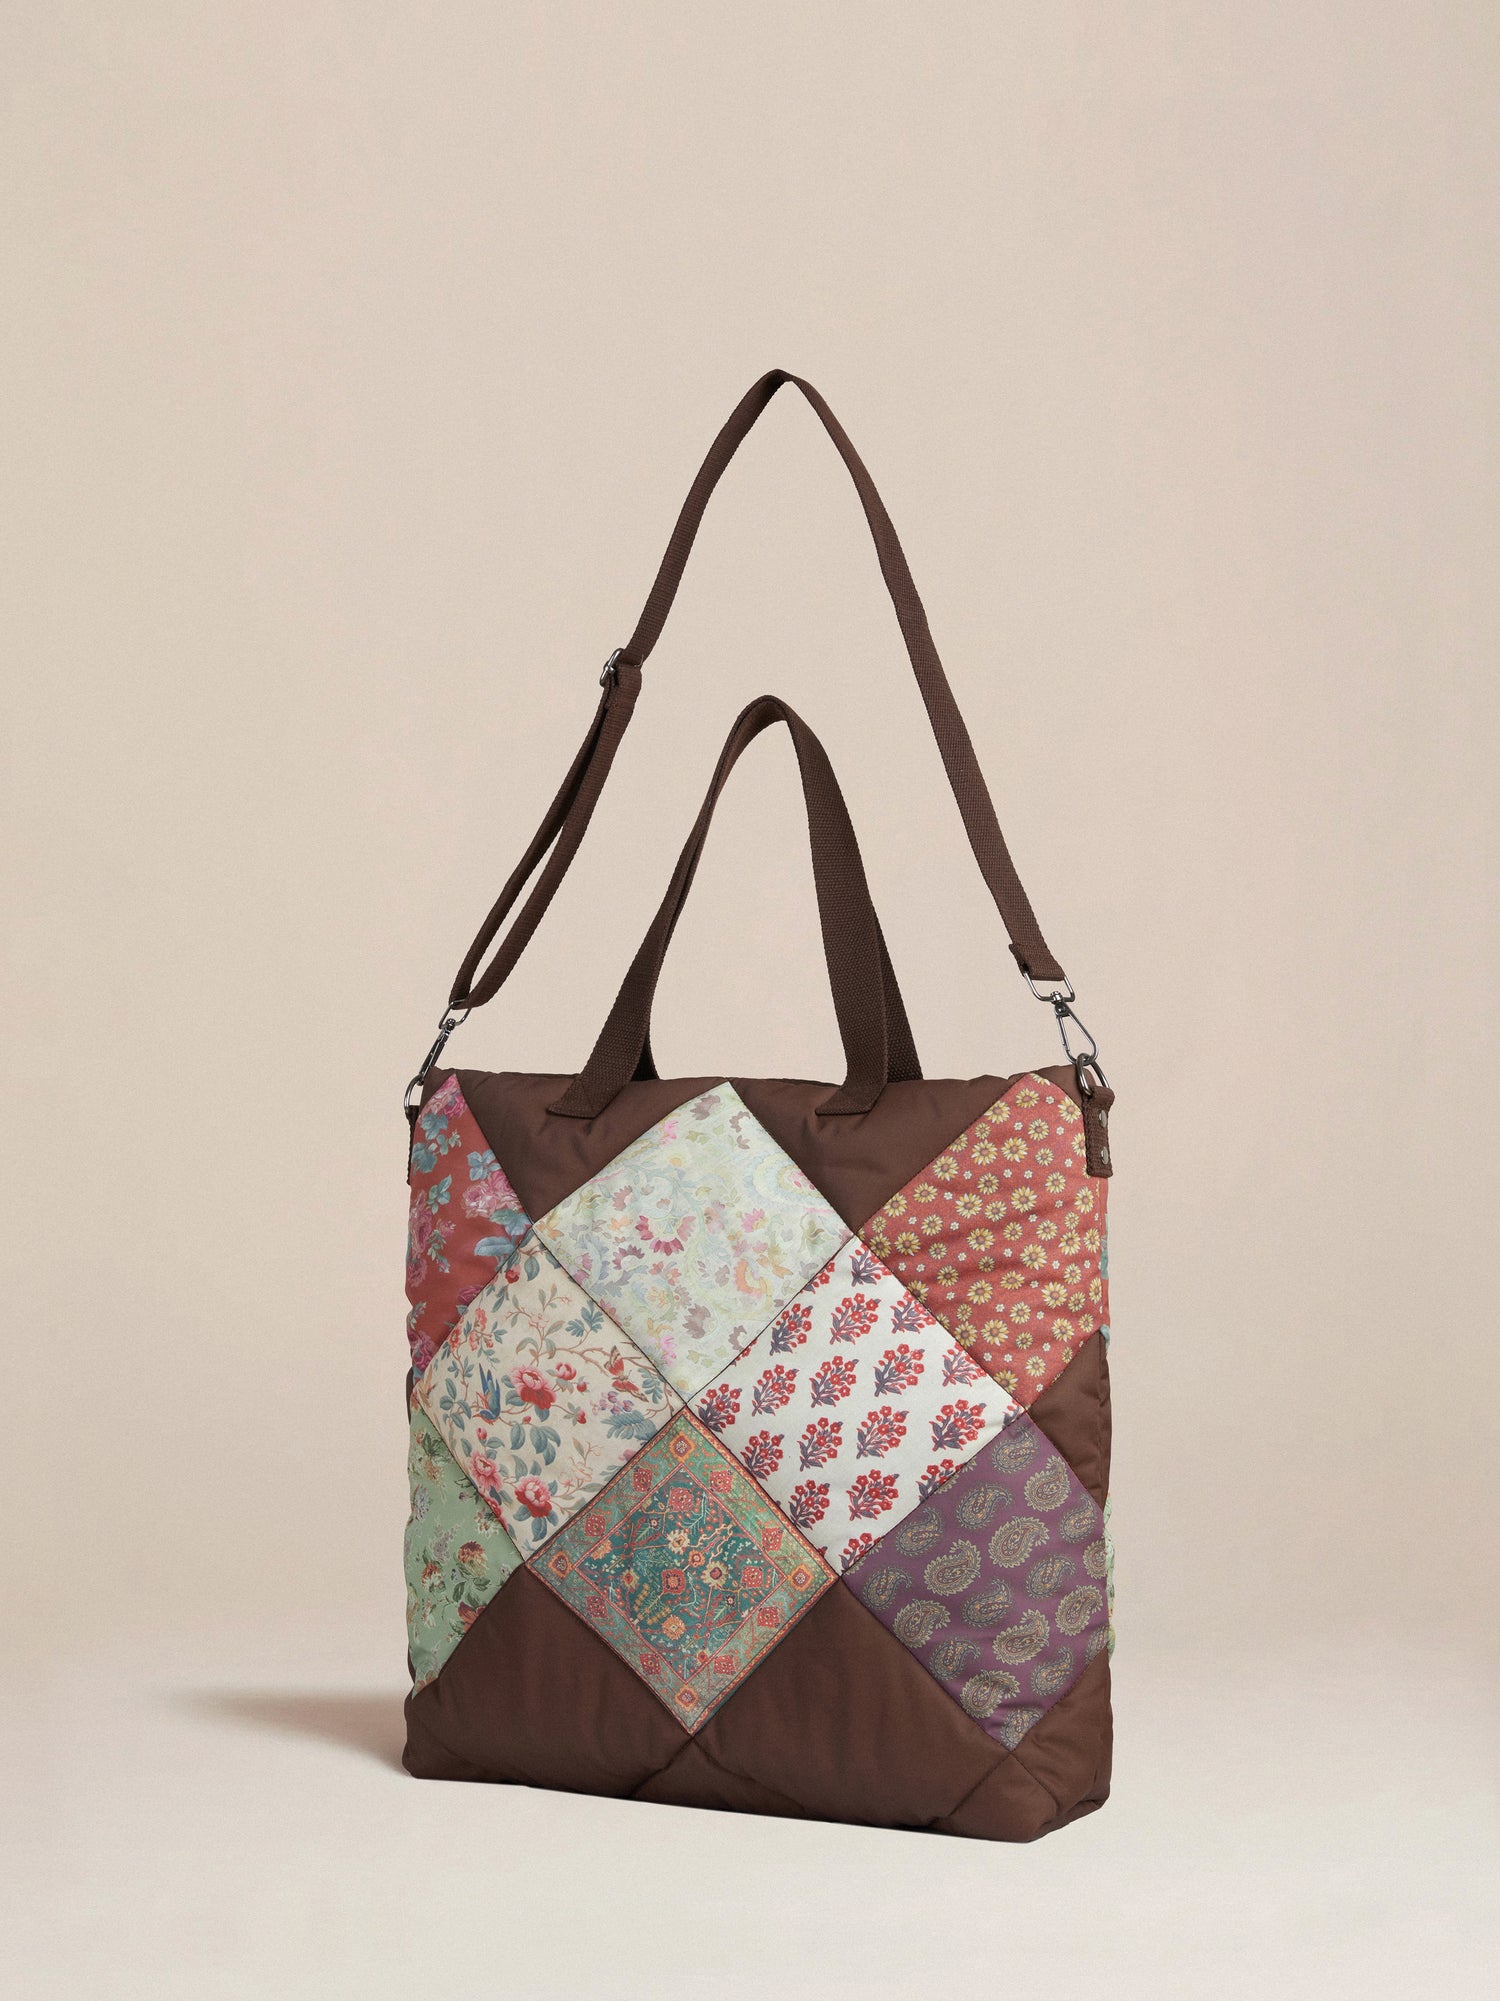 A brown Parisa Quilted Tapestry Bag with a patchwork pattern on it, featuring South Asian prints by Profound.